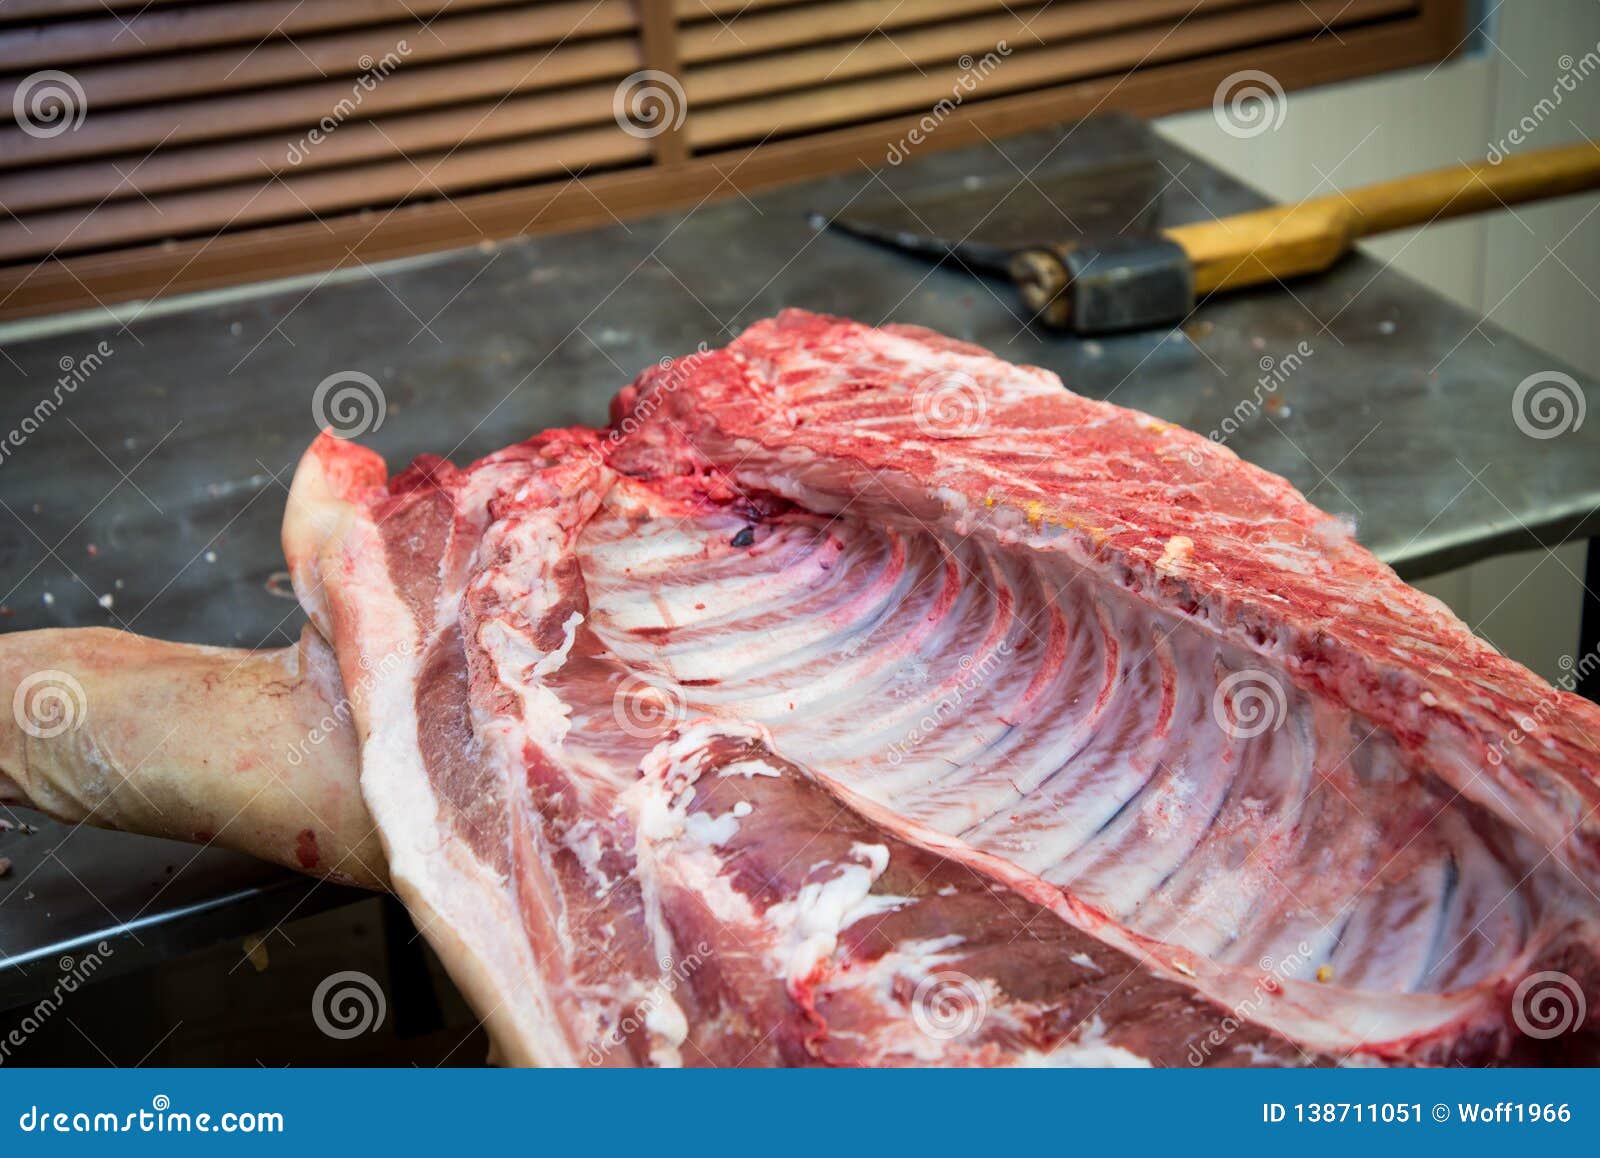 Superb Raw Juicy Pork Meat From The Counter Lose Up Cross Section Of A Piece Of Raw Pork Meat In A Organic Market Stock Image Image Of Background Farm